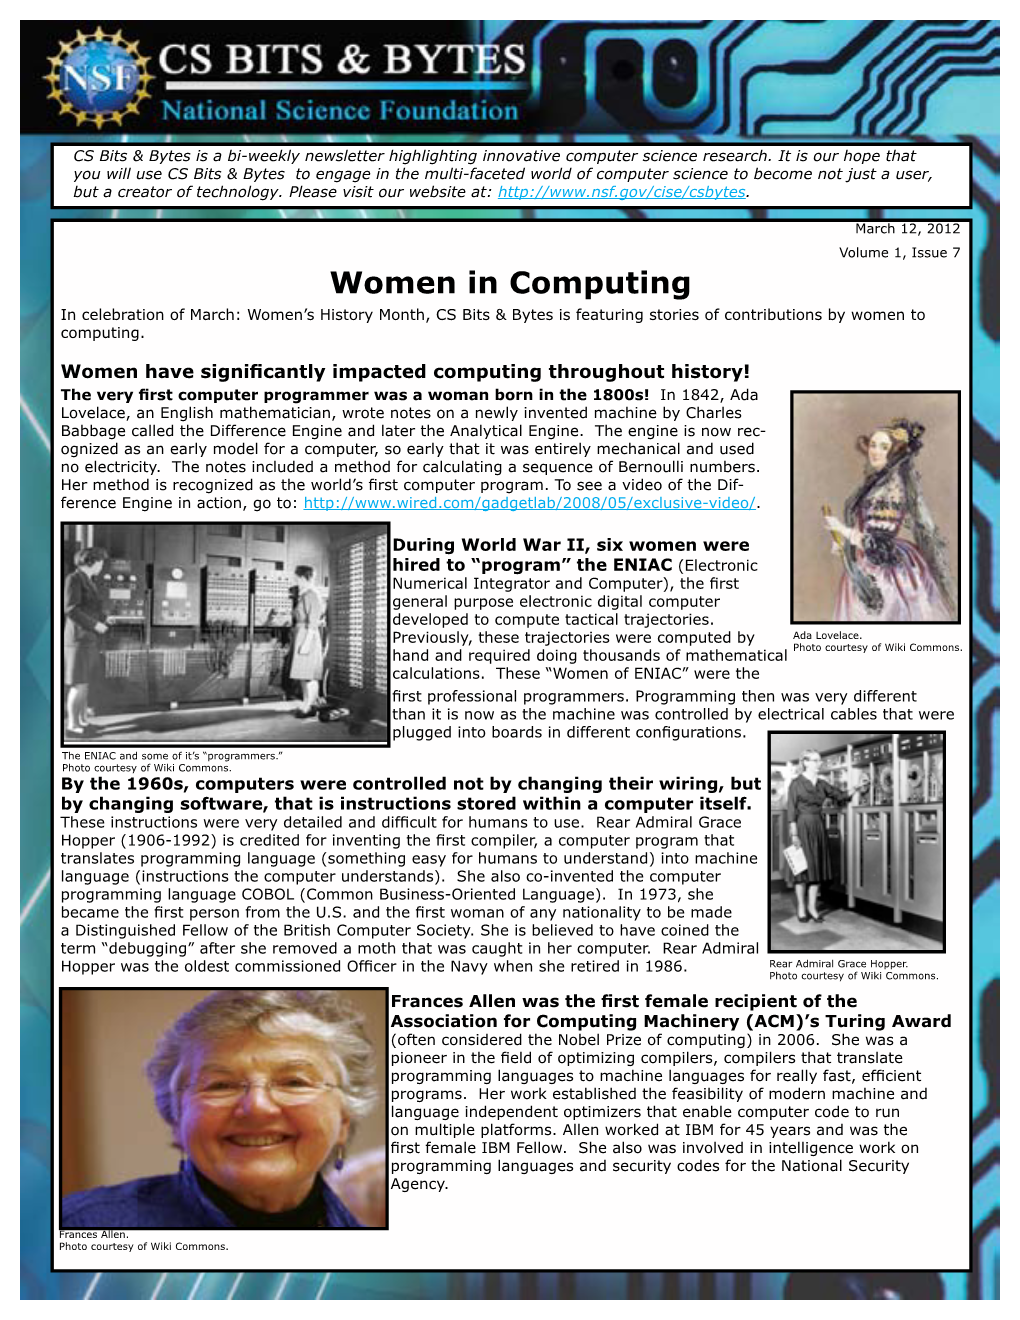 Women in Computing in Celebration of March: Women’S History Month, CS Bits & Bytes Is Featuring Stories of Contributions by Women to Computing